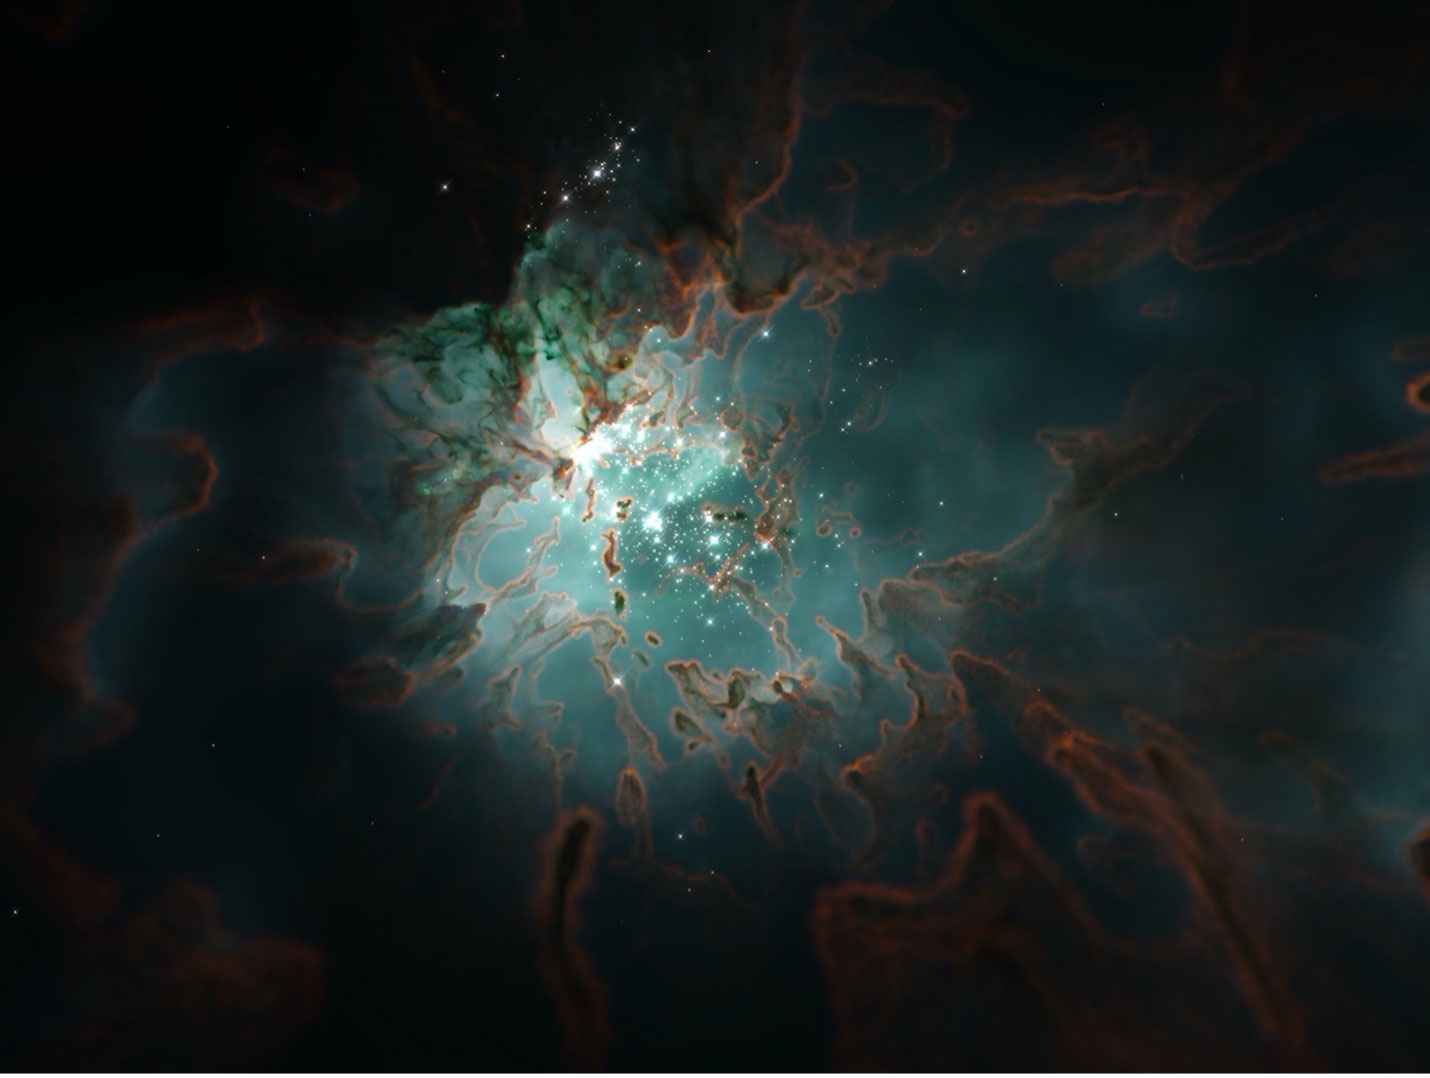 Mock narrowband observation of a simulated star forming region where massive stars destroy their parent cloud.